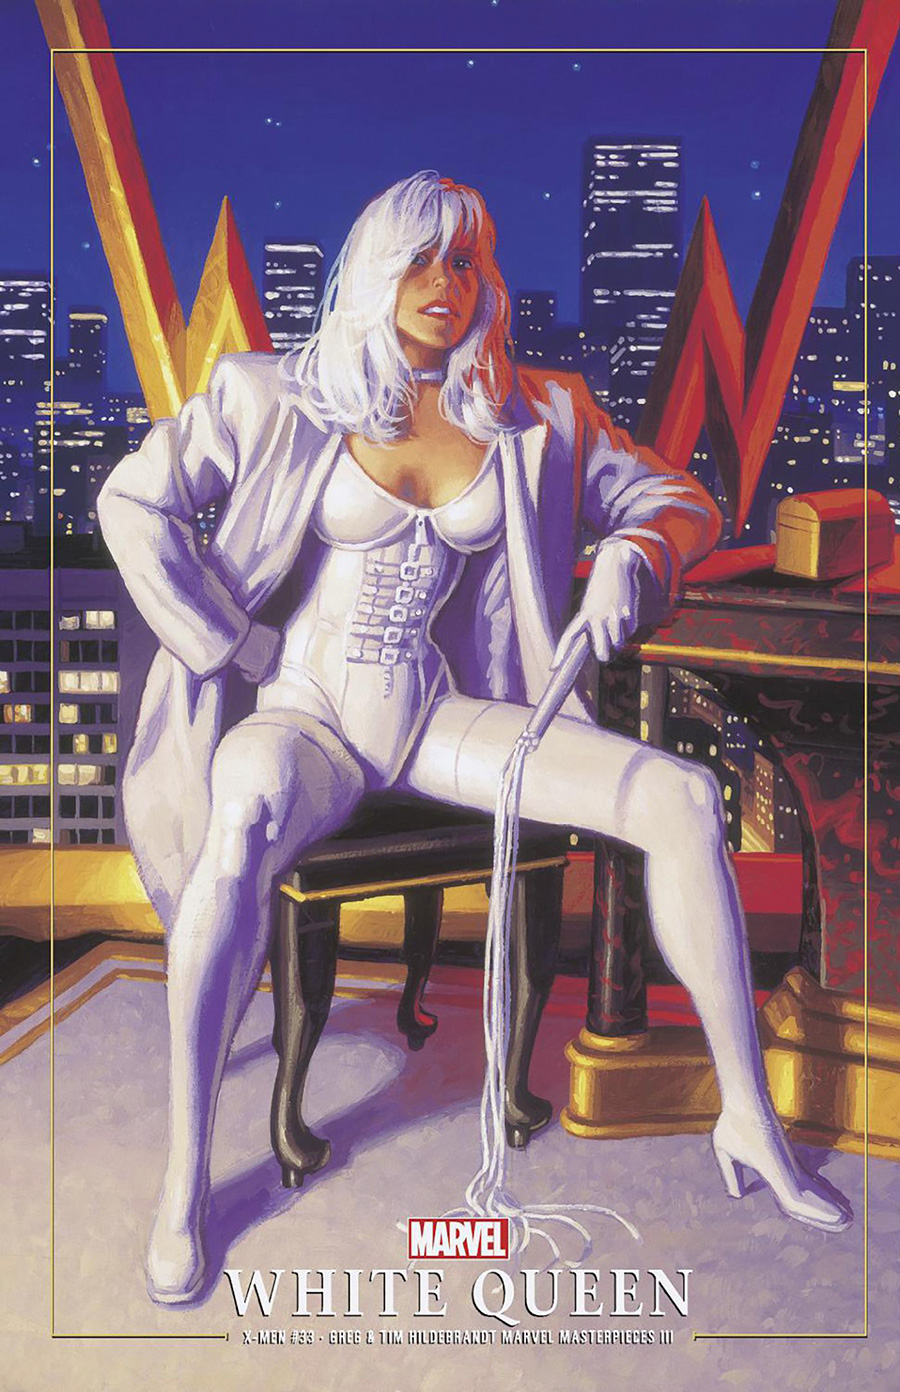 X-Men Vol 6 #33 Cover B Variant Greg Hildebrandt & Tim Hildebrandt Marvel Masterpieces III White Queen Cover (Fall Of The House Of X Tie-In)